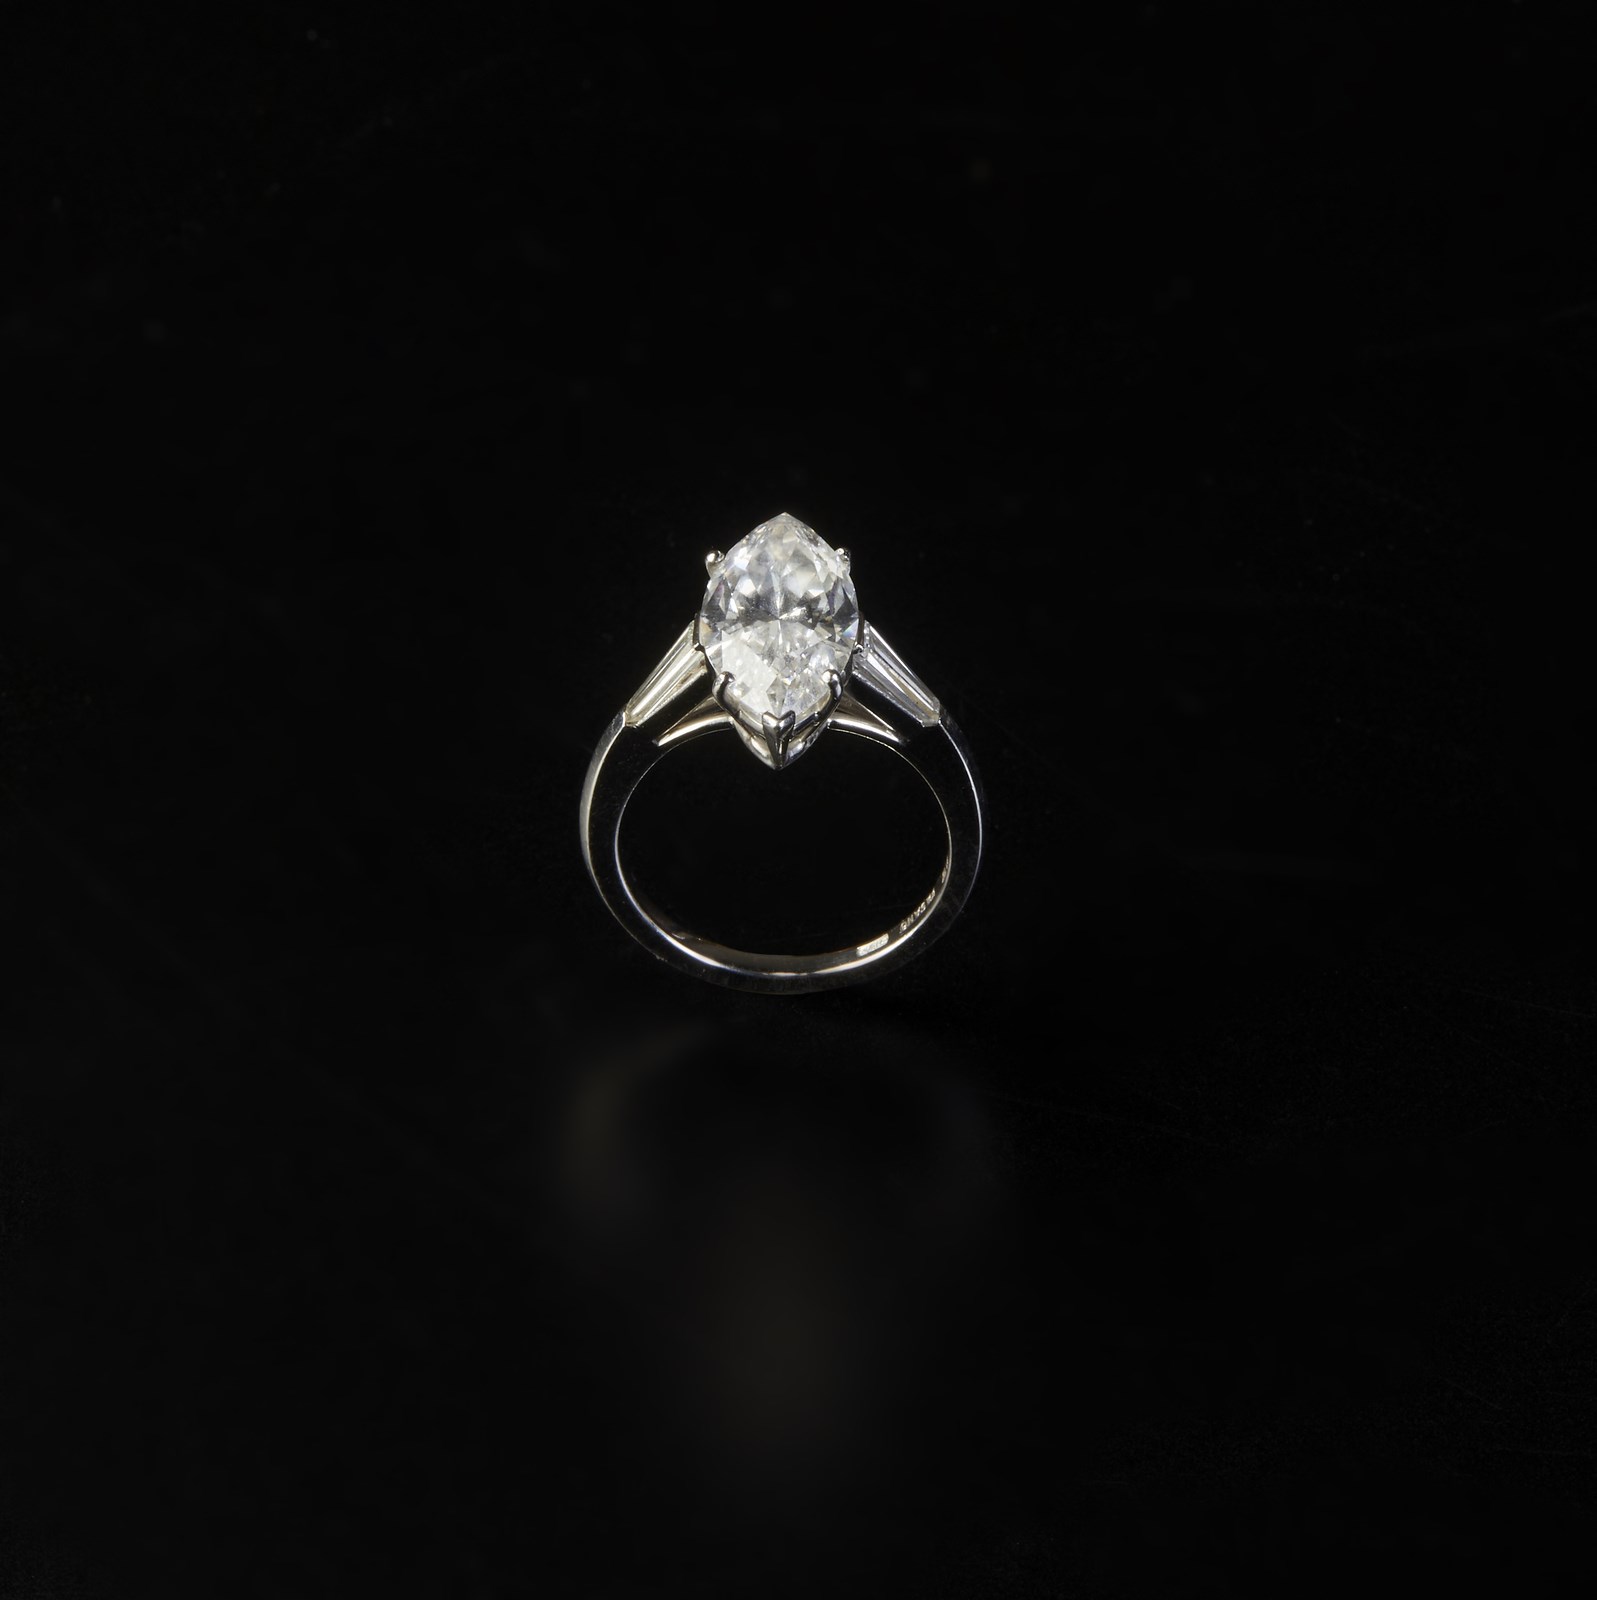 750/1000 white gold ring with marquise central cut diamond weighing 3.44 ct. flanked by two white tapered cut diamonds. 
Internal features: VVS1
Color: D (. )